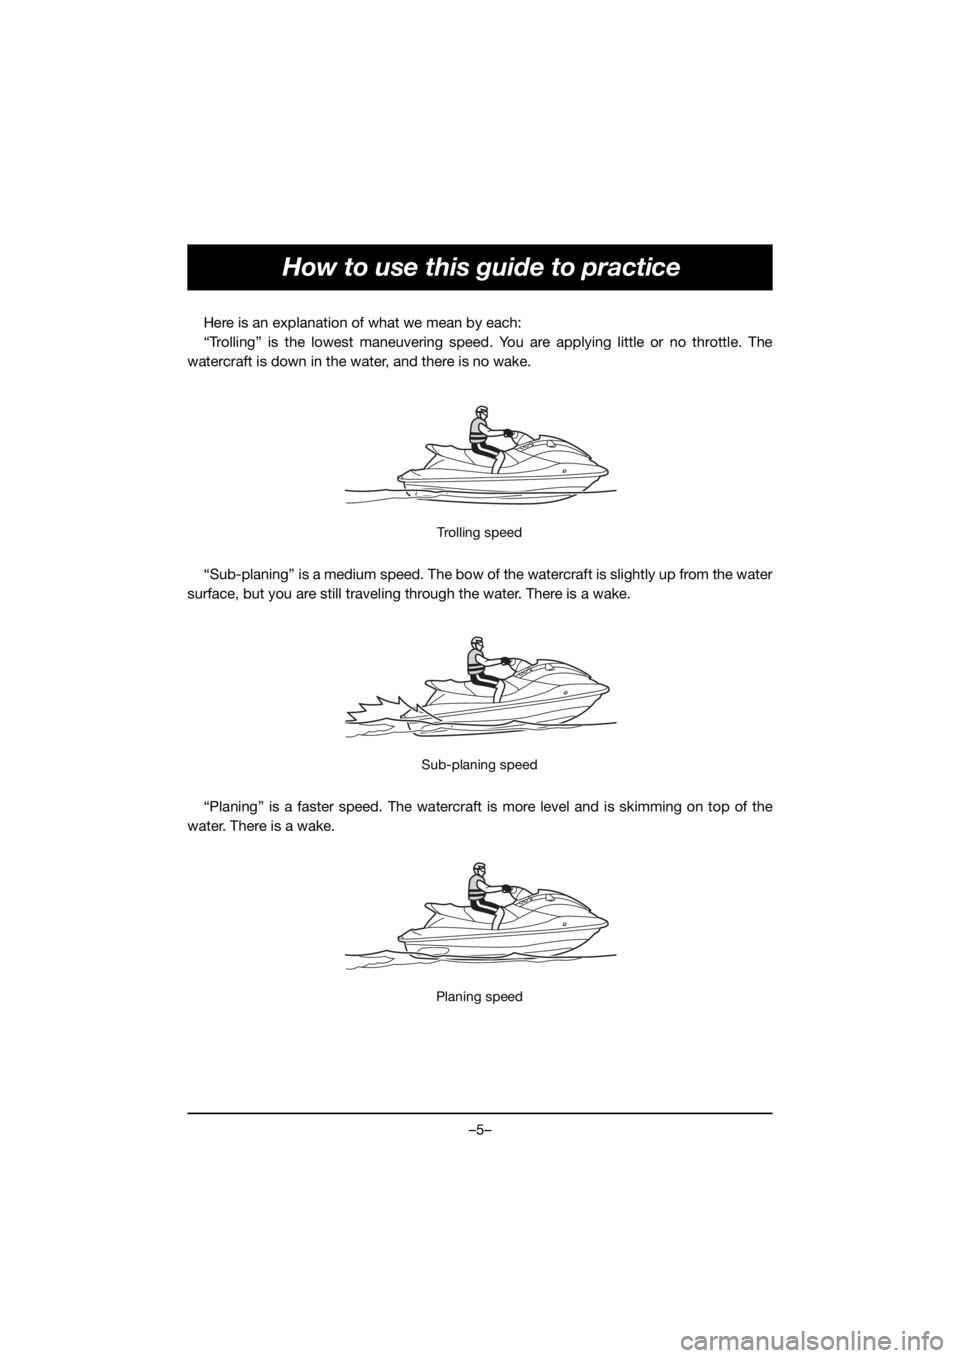 YAMAHA VX DELUXE 2021  Manuale de Empleo (in Spanish) –5–
How to use this guide to practice
Here is an explanation of what we mean by each:
“Trolling” is the lowest maneuvering speed. You are applying little or no throttle. The
watercraft is down